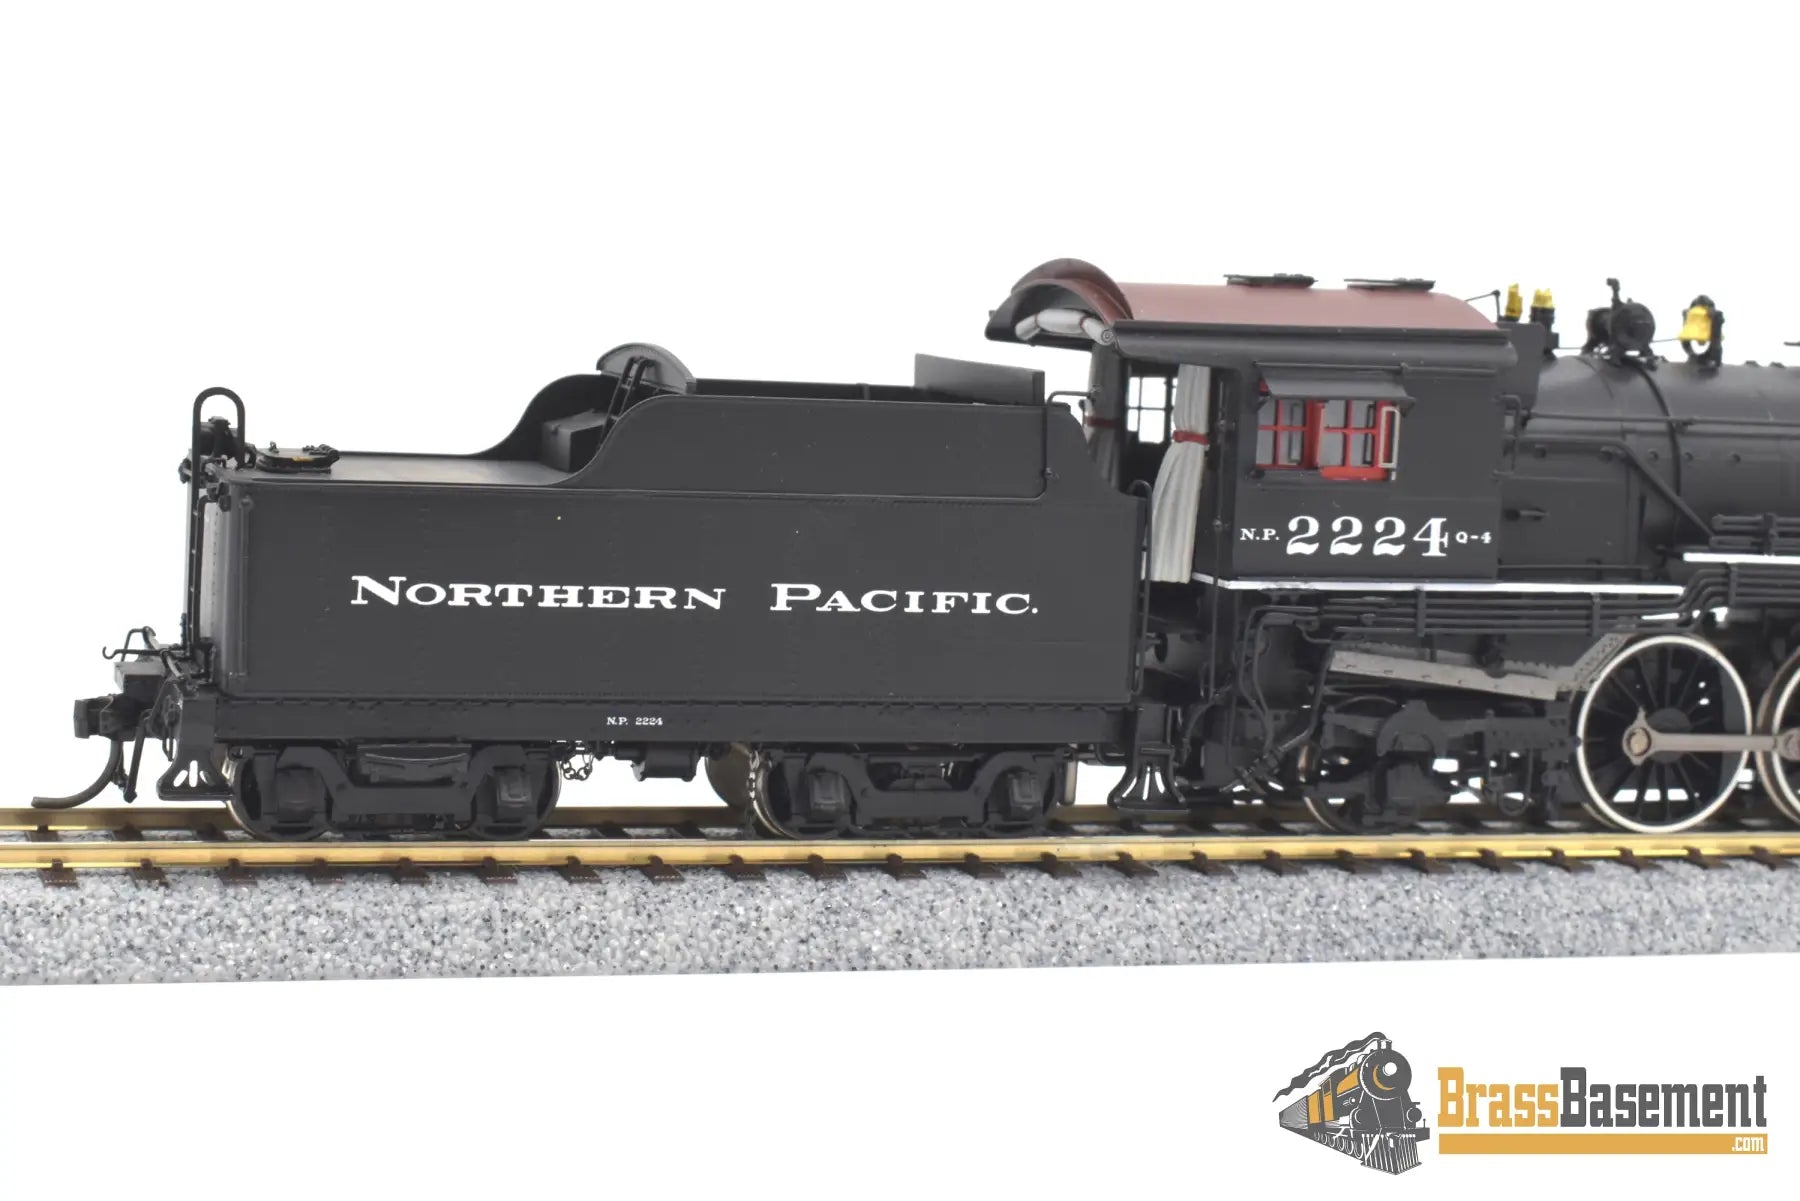 Ho Brass - Psc 18016 - 1 Northern Pacific 4 - 6 - 2 Q - 4 #2224 Black Boiler F/P Boo - Rim Notes